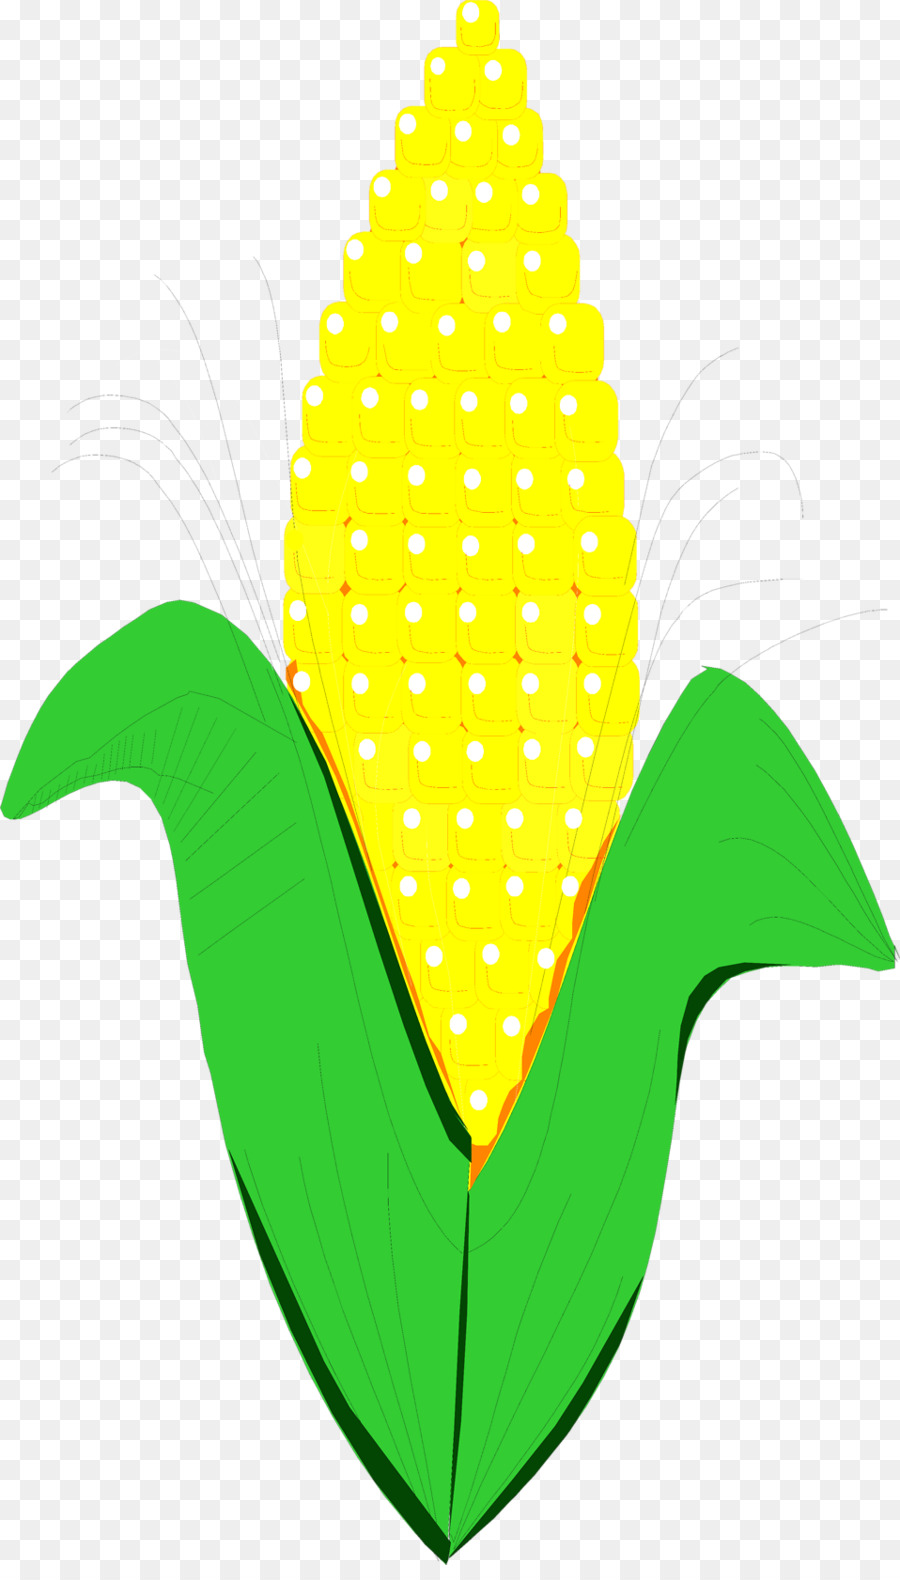 Candy corn Corn on the cob Maize Clip art - Being Cliparts png download - 958*1666 - Free Transparent Candy Corn png Download.